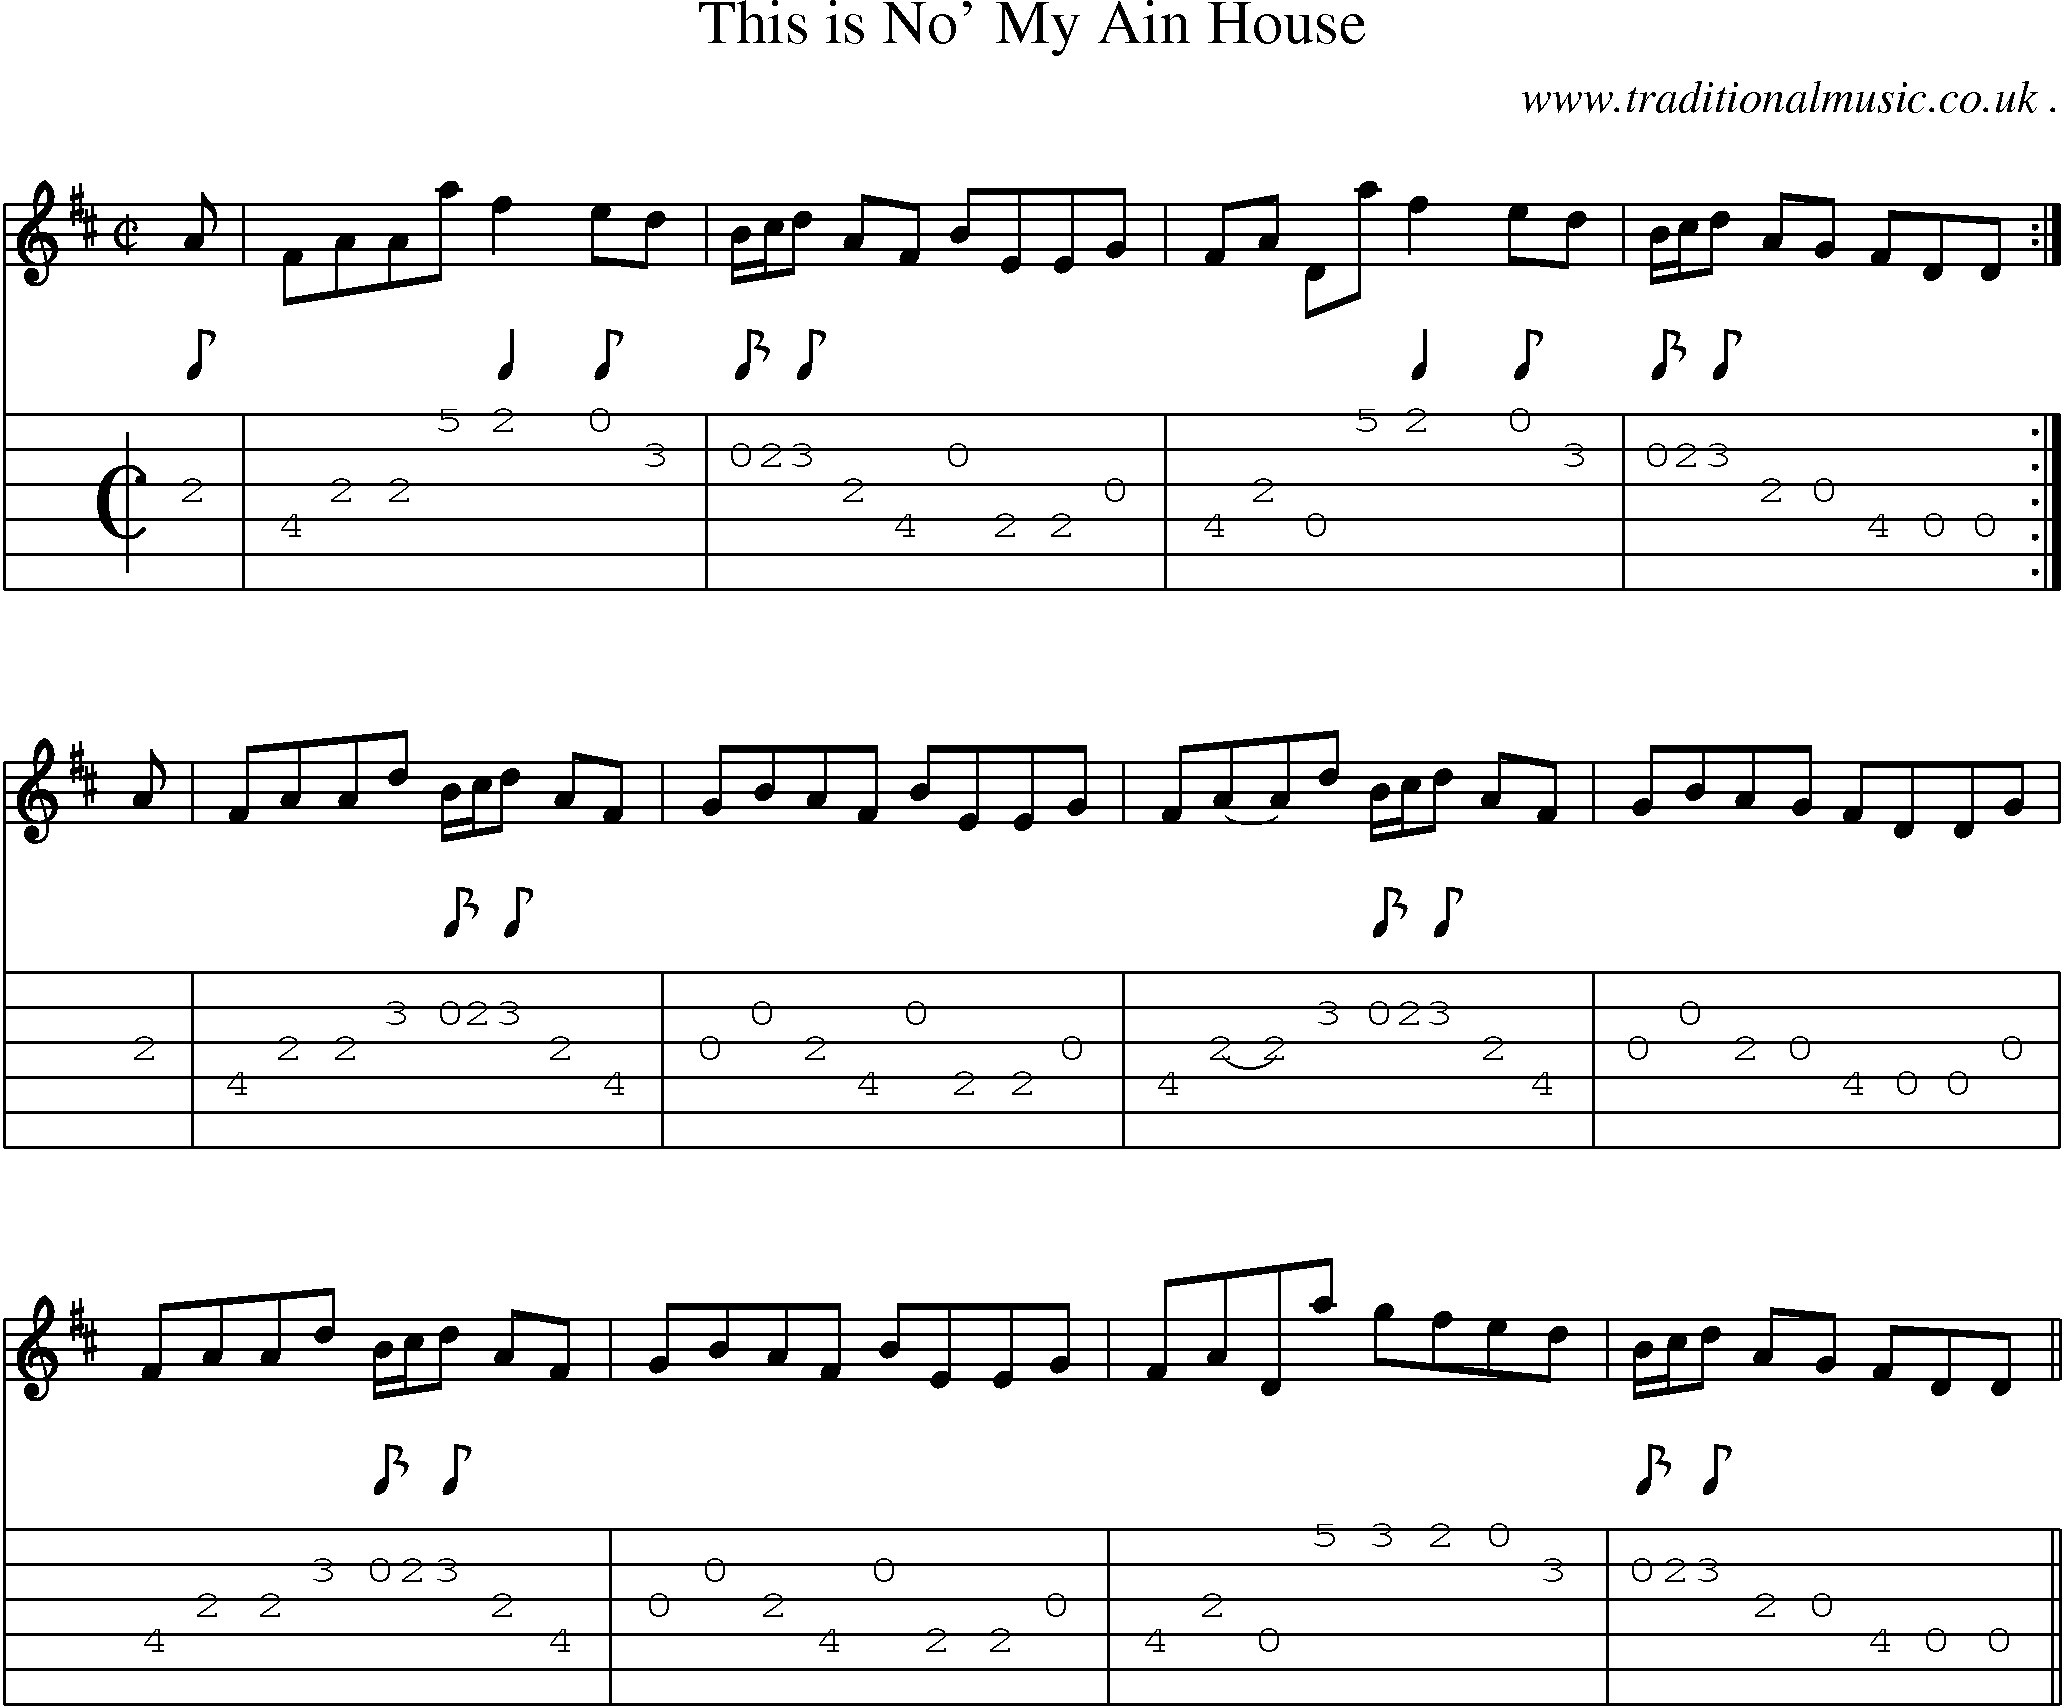 Sheet-music  score, Chords and Guitar Tabs for This Is No My Ain House